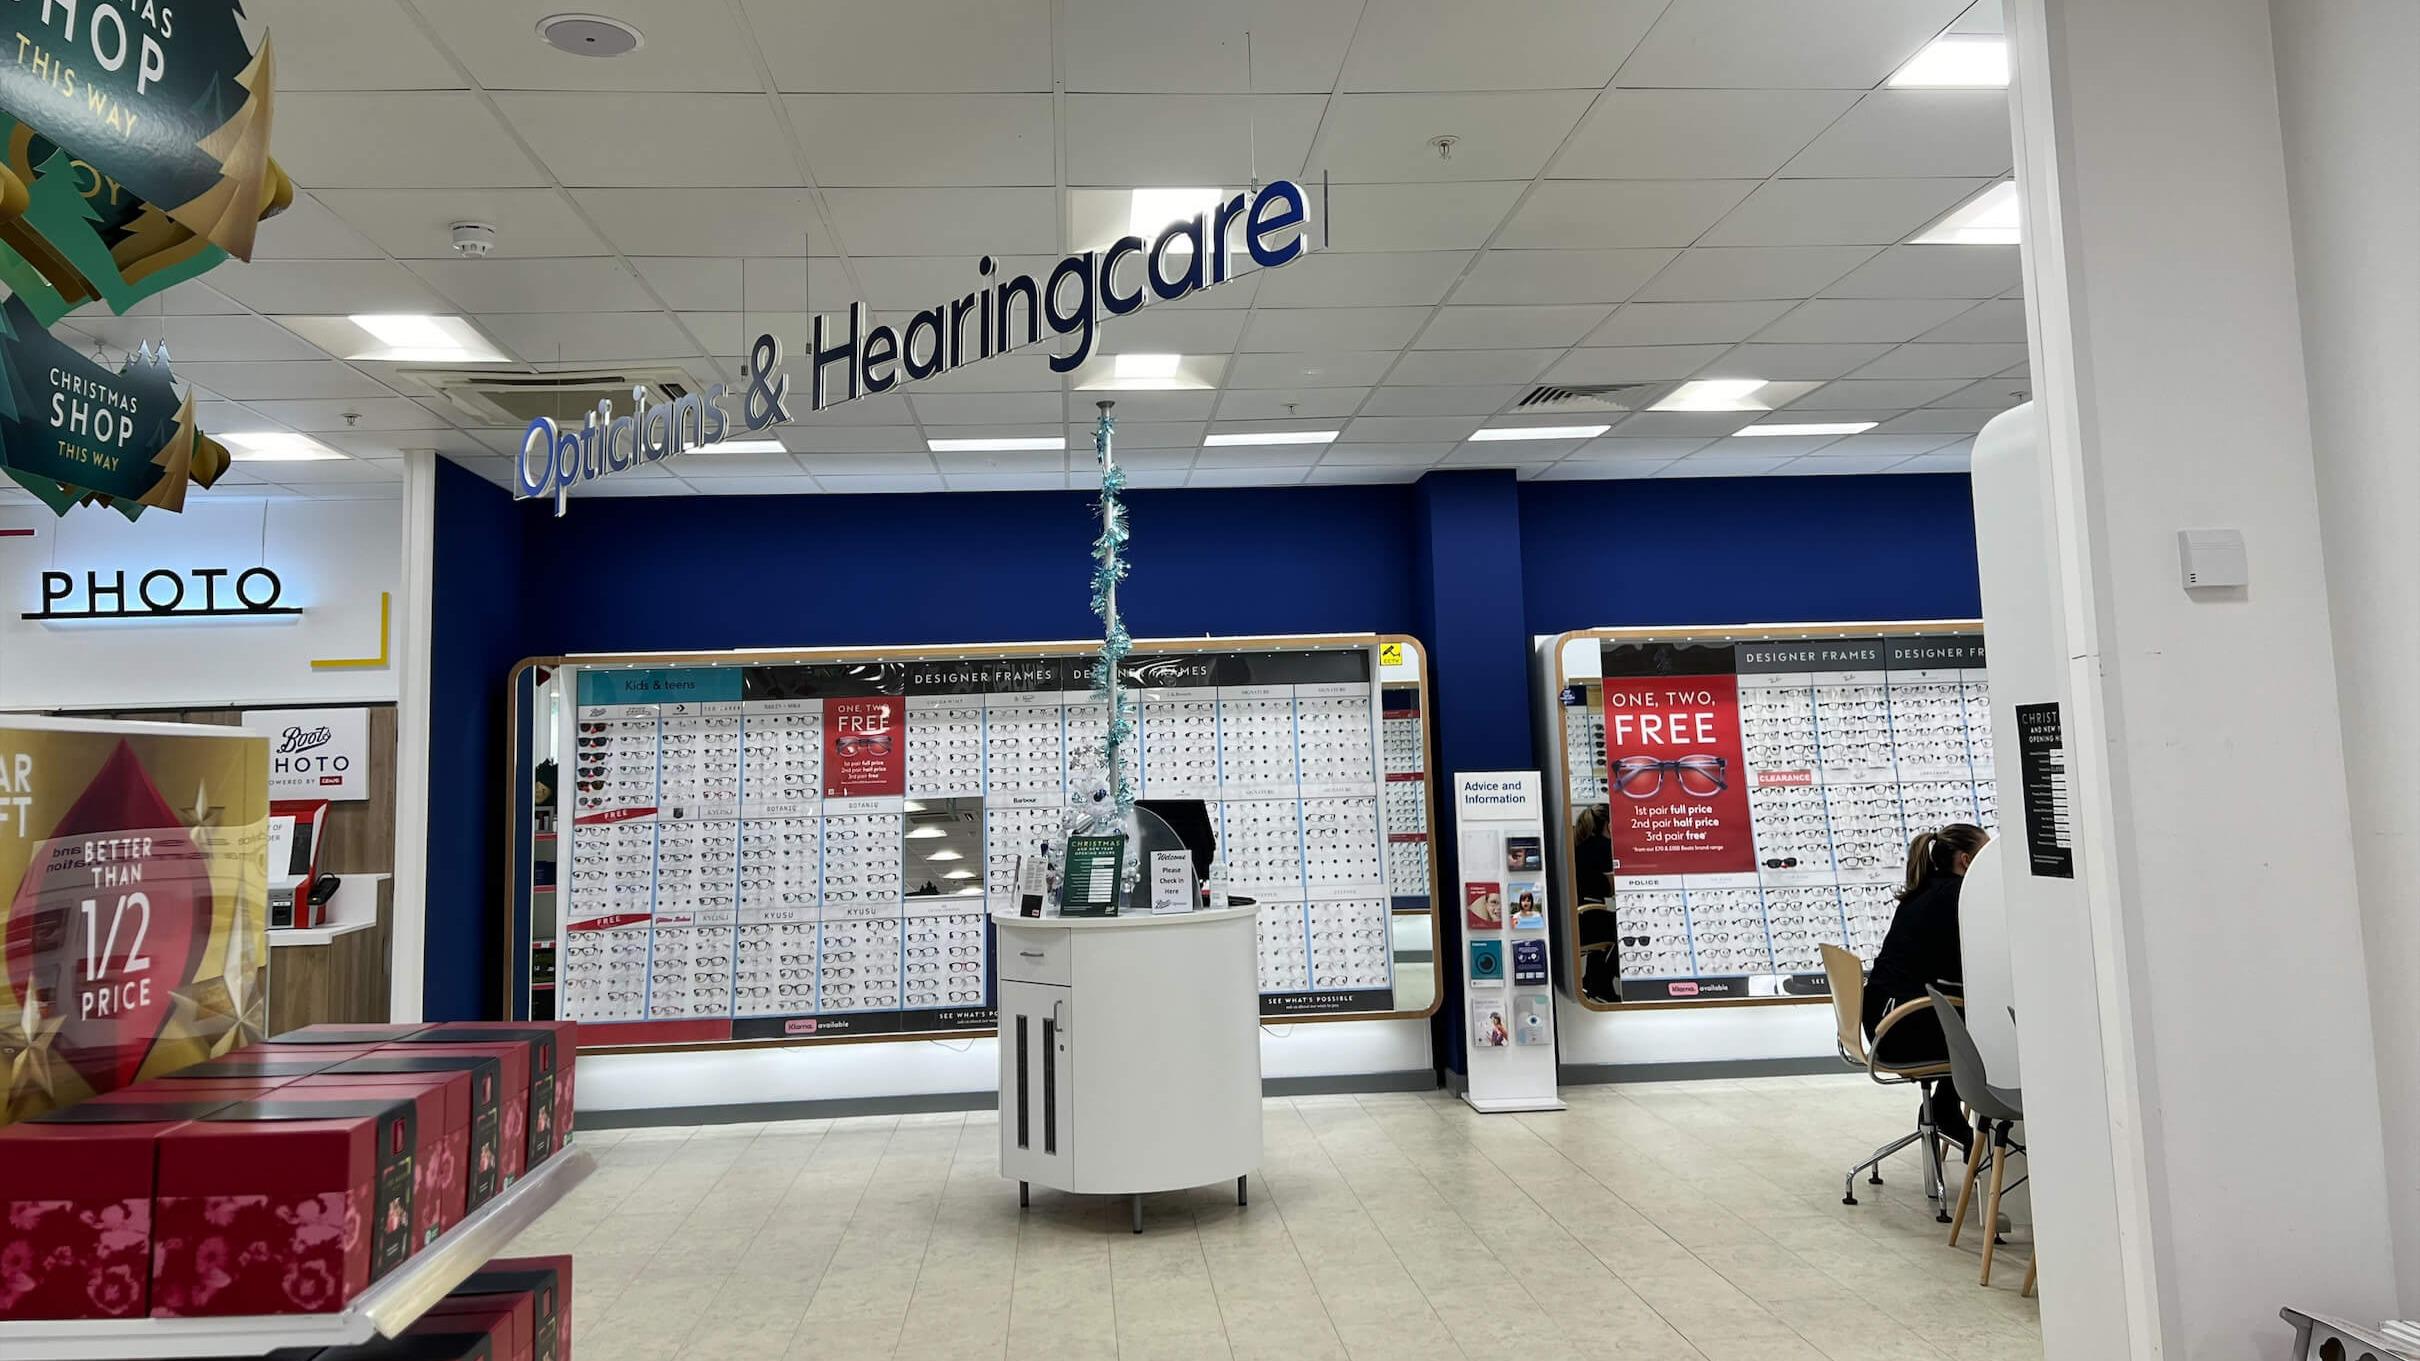 Boots Hearingcare Boots Hearingcare Bracknell Bracknell 03452 701600